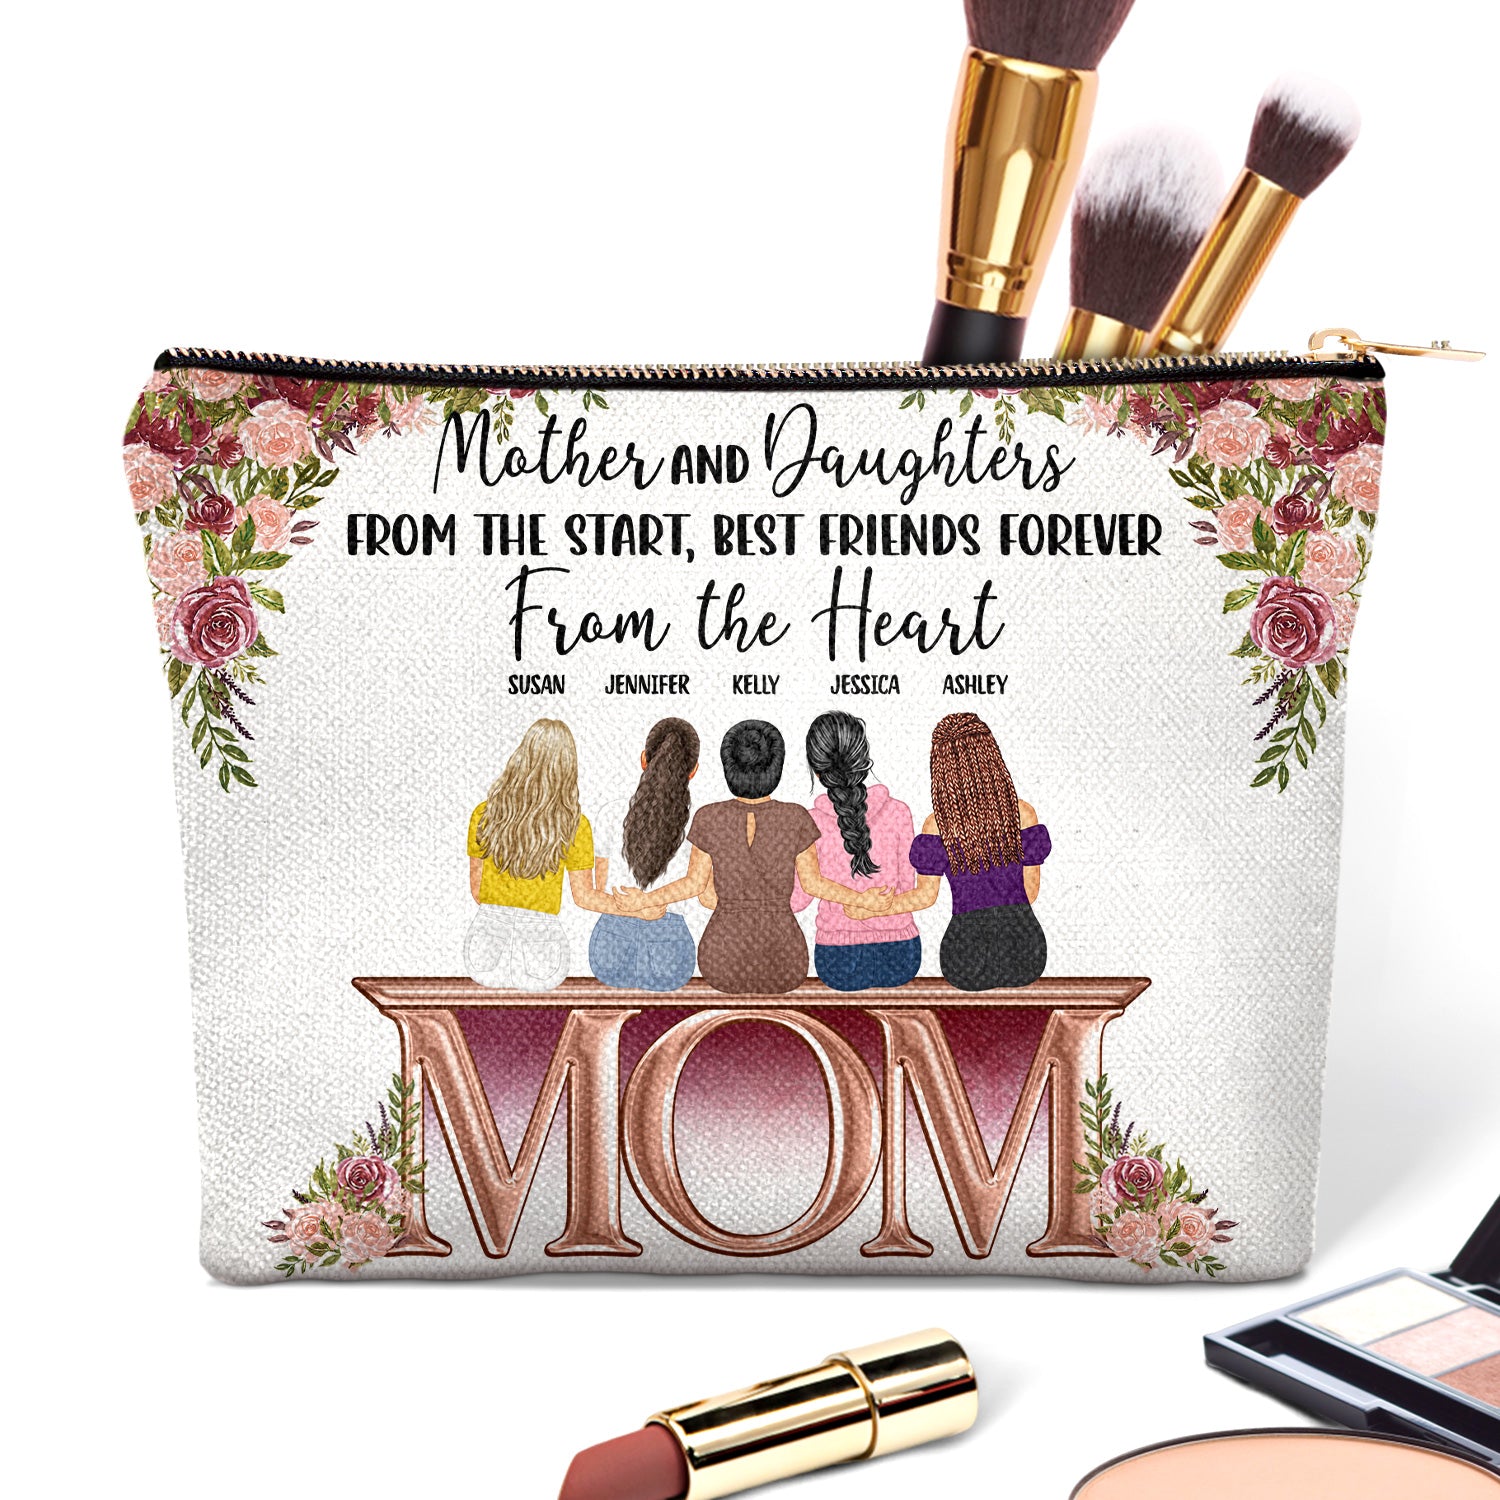 Mother And Daughters Best Friends Forever - Birthday, Loving Gift For Mom, Mum, Mama - Personalized Cosmetic Bag